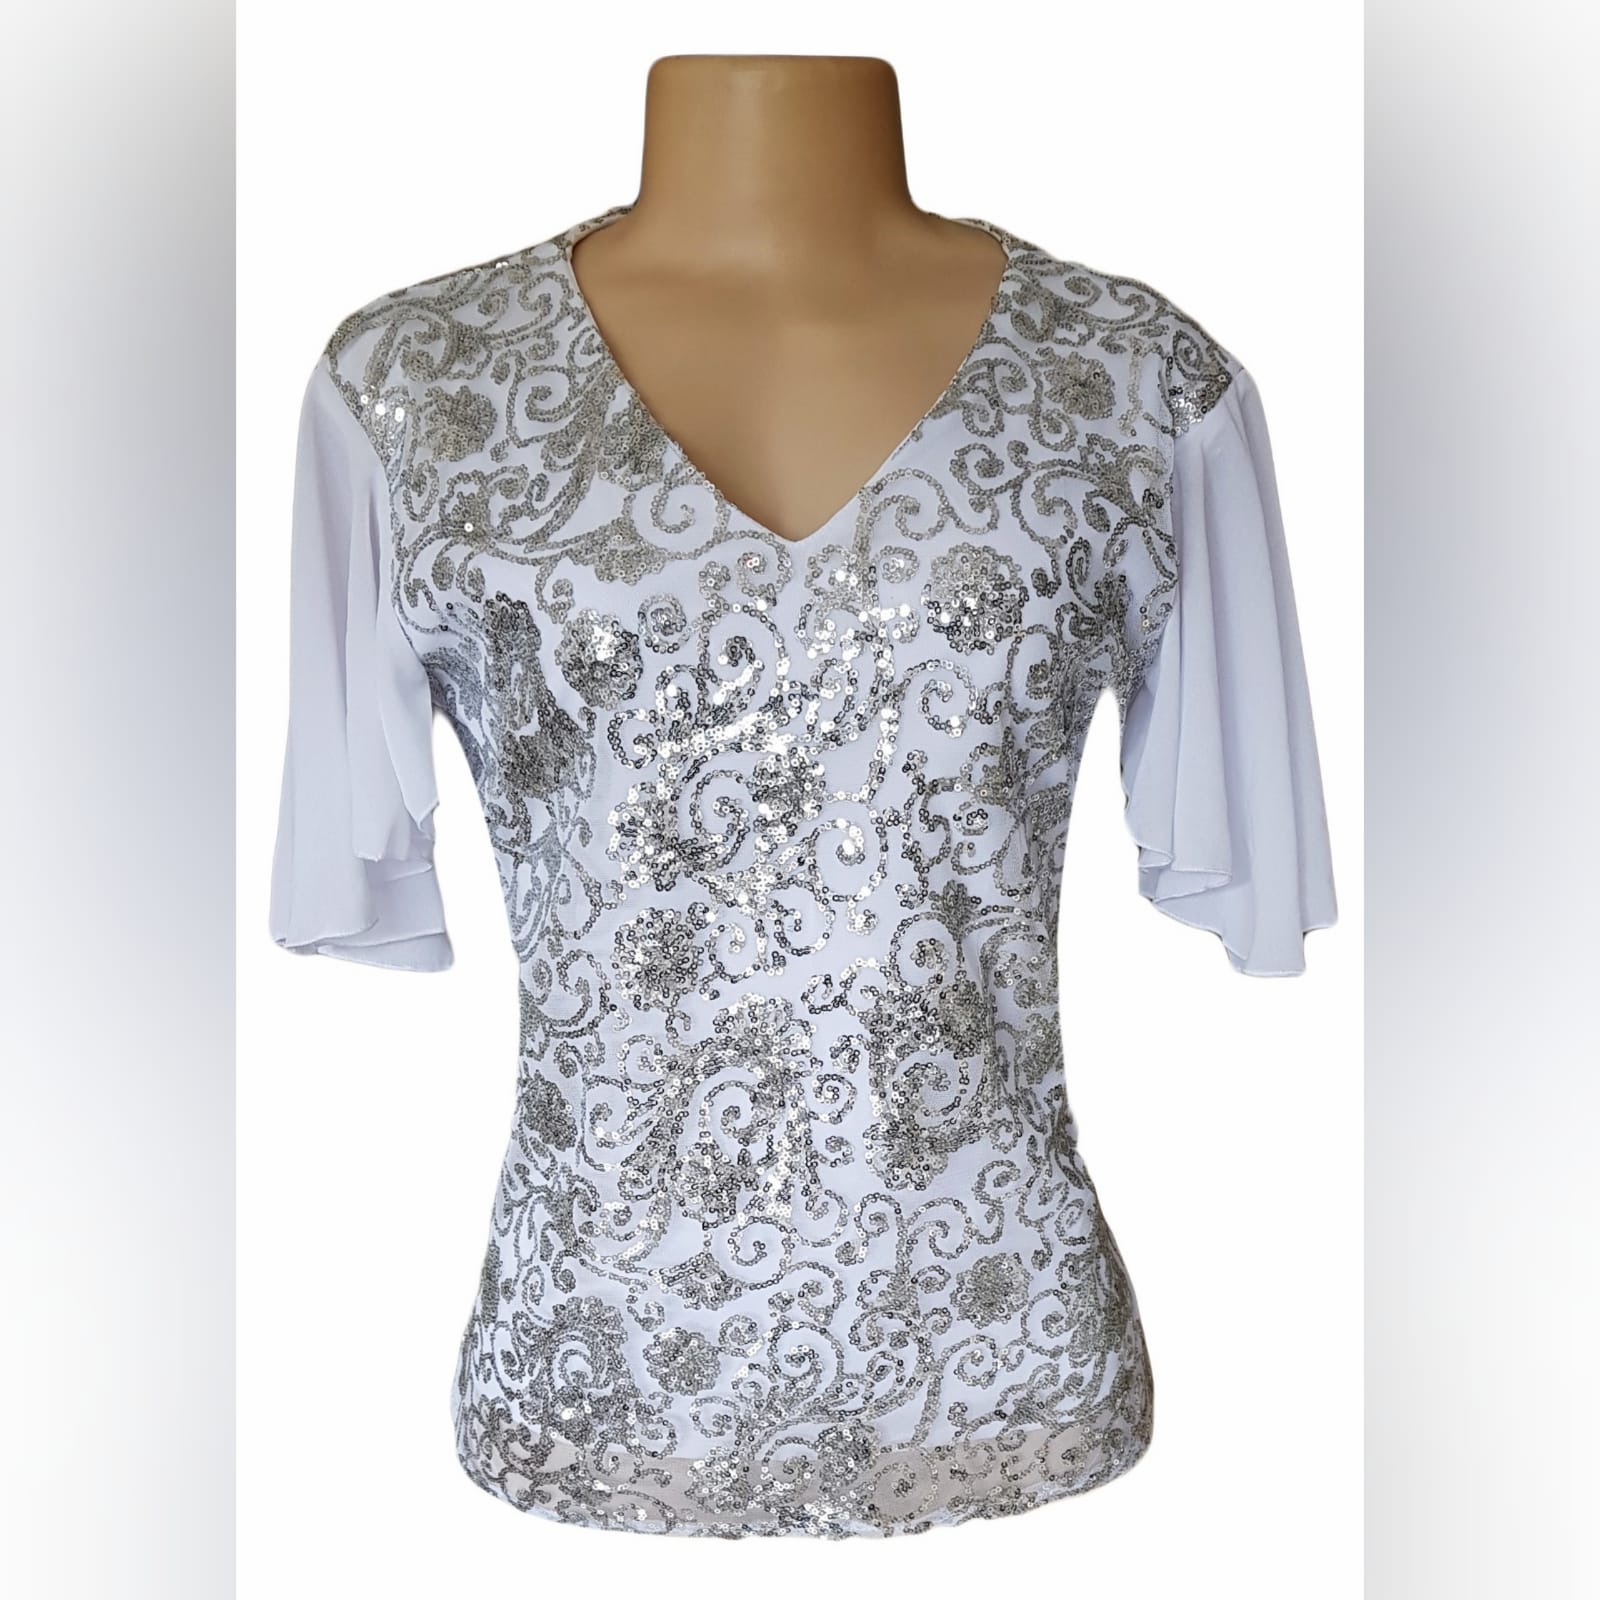 White patterned sequins smart casual top 1 white patterned sequins smart casual top with a v neckline and short chiffon flowy sleeves